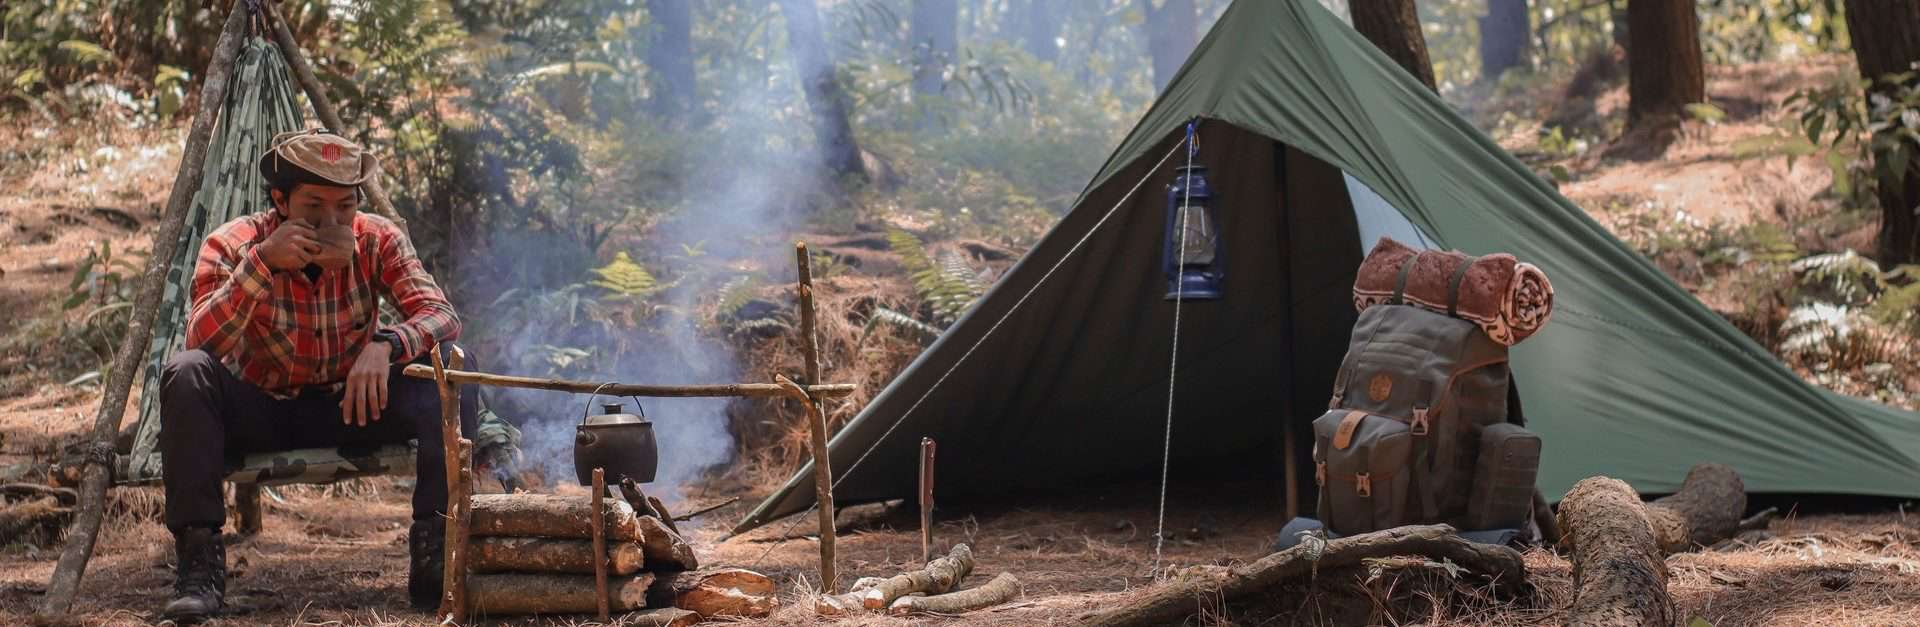 Camping Hot Tent With Stove Jack